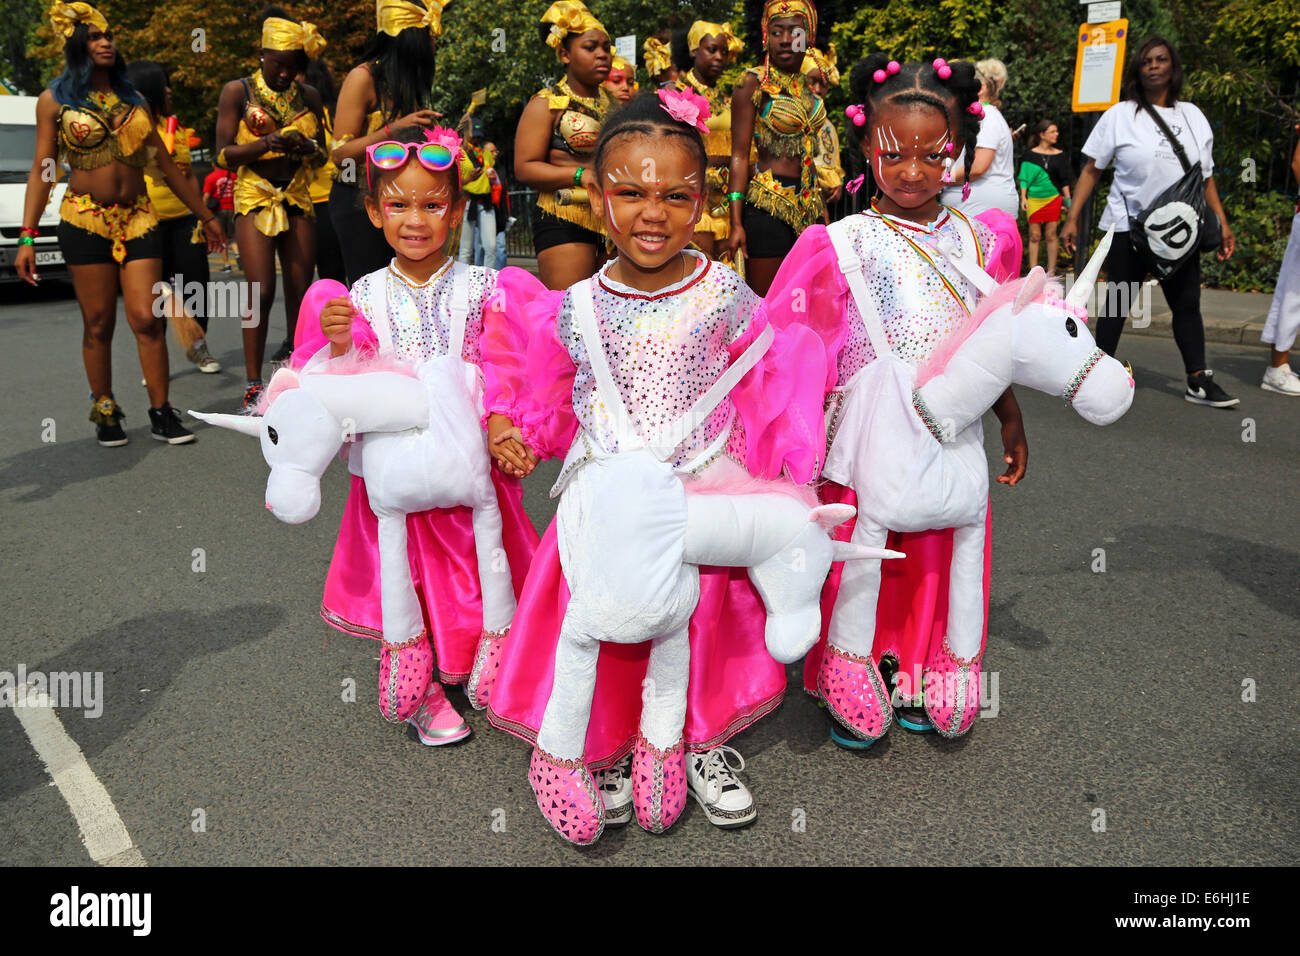 London, UK. 24th August 2014. Participants in the parade on Children's Day at Notting Hill Carnival 2014, London. The first day of the carnival is traditionally for children but plenty of adults join in as well. Credit:  Paul Brown/Alamy Live News Stock Photo